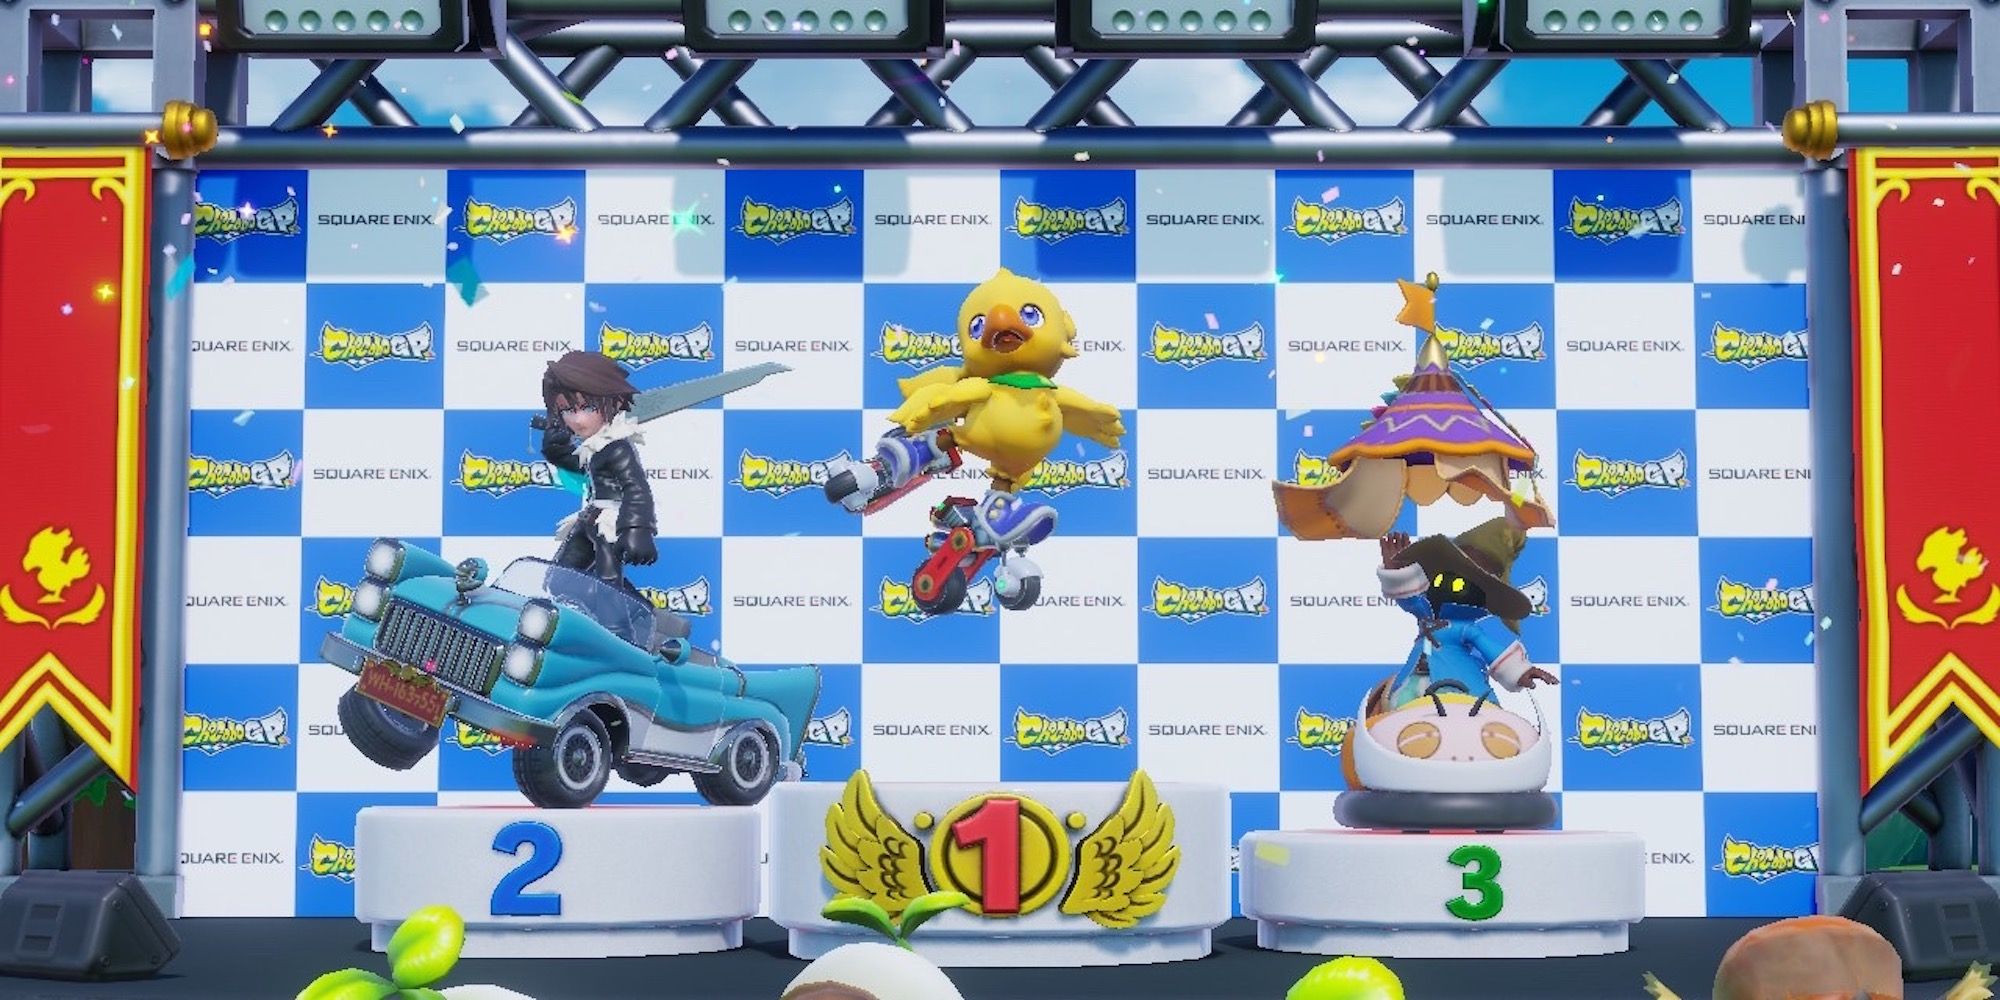 The victory screen in Chocobo GP